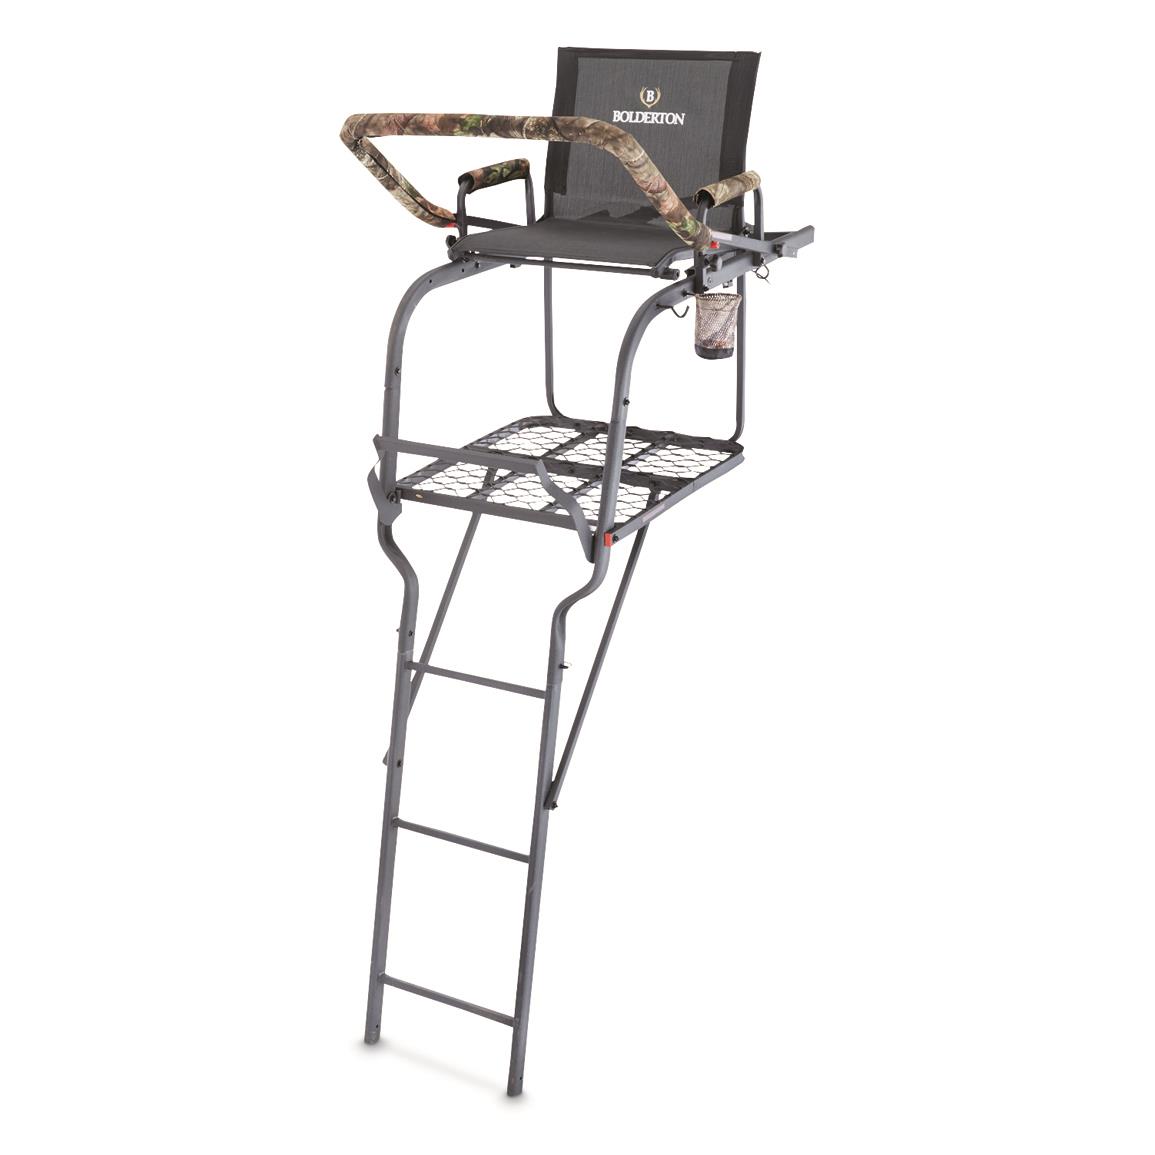 Bolderton 22' Ladder Tree Stand with Grizzly Grip Safety System